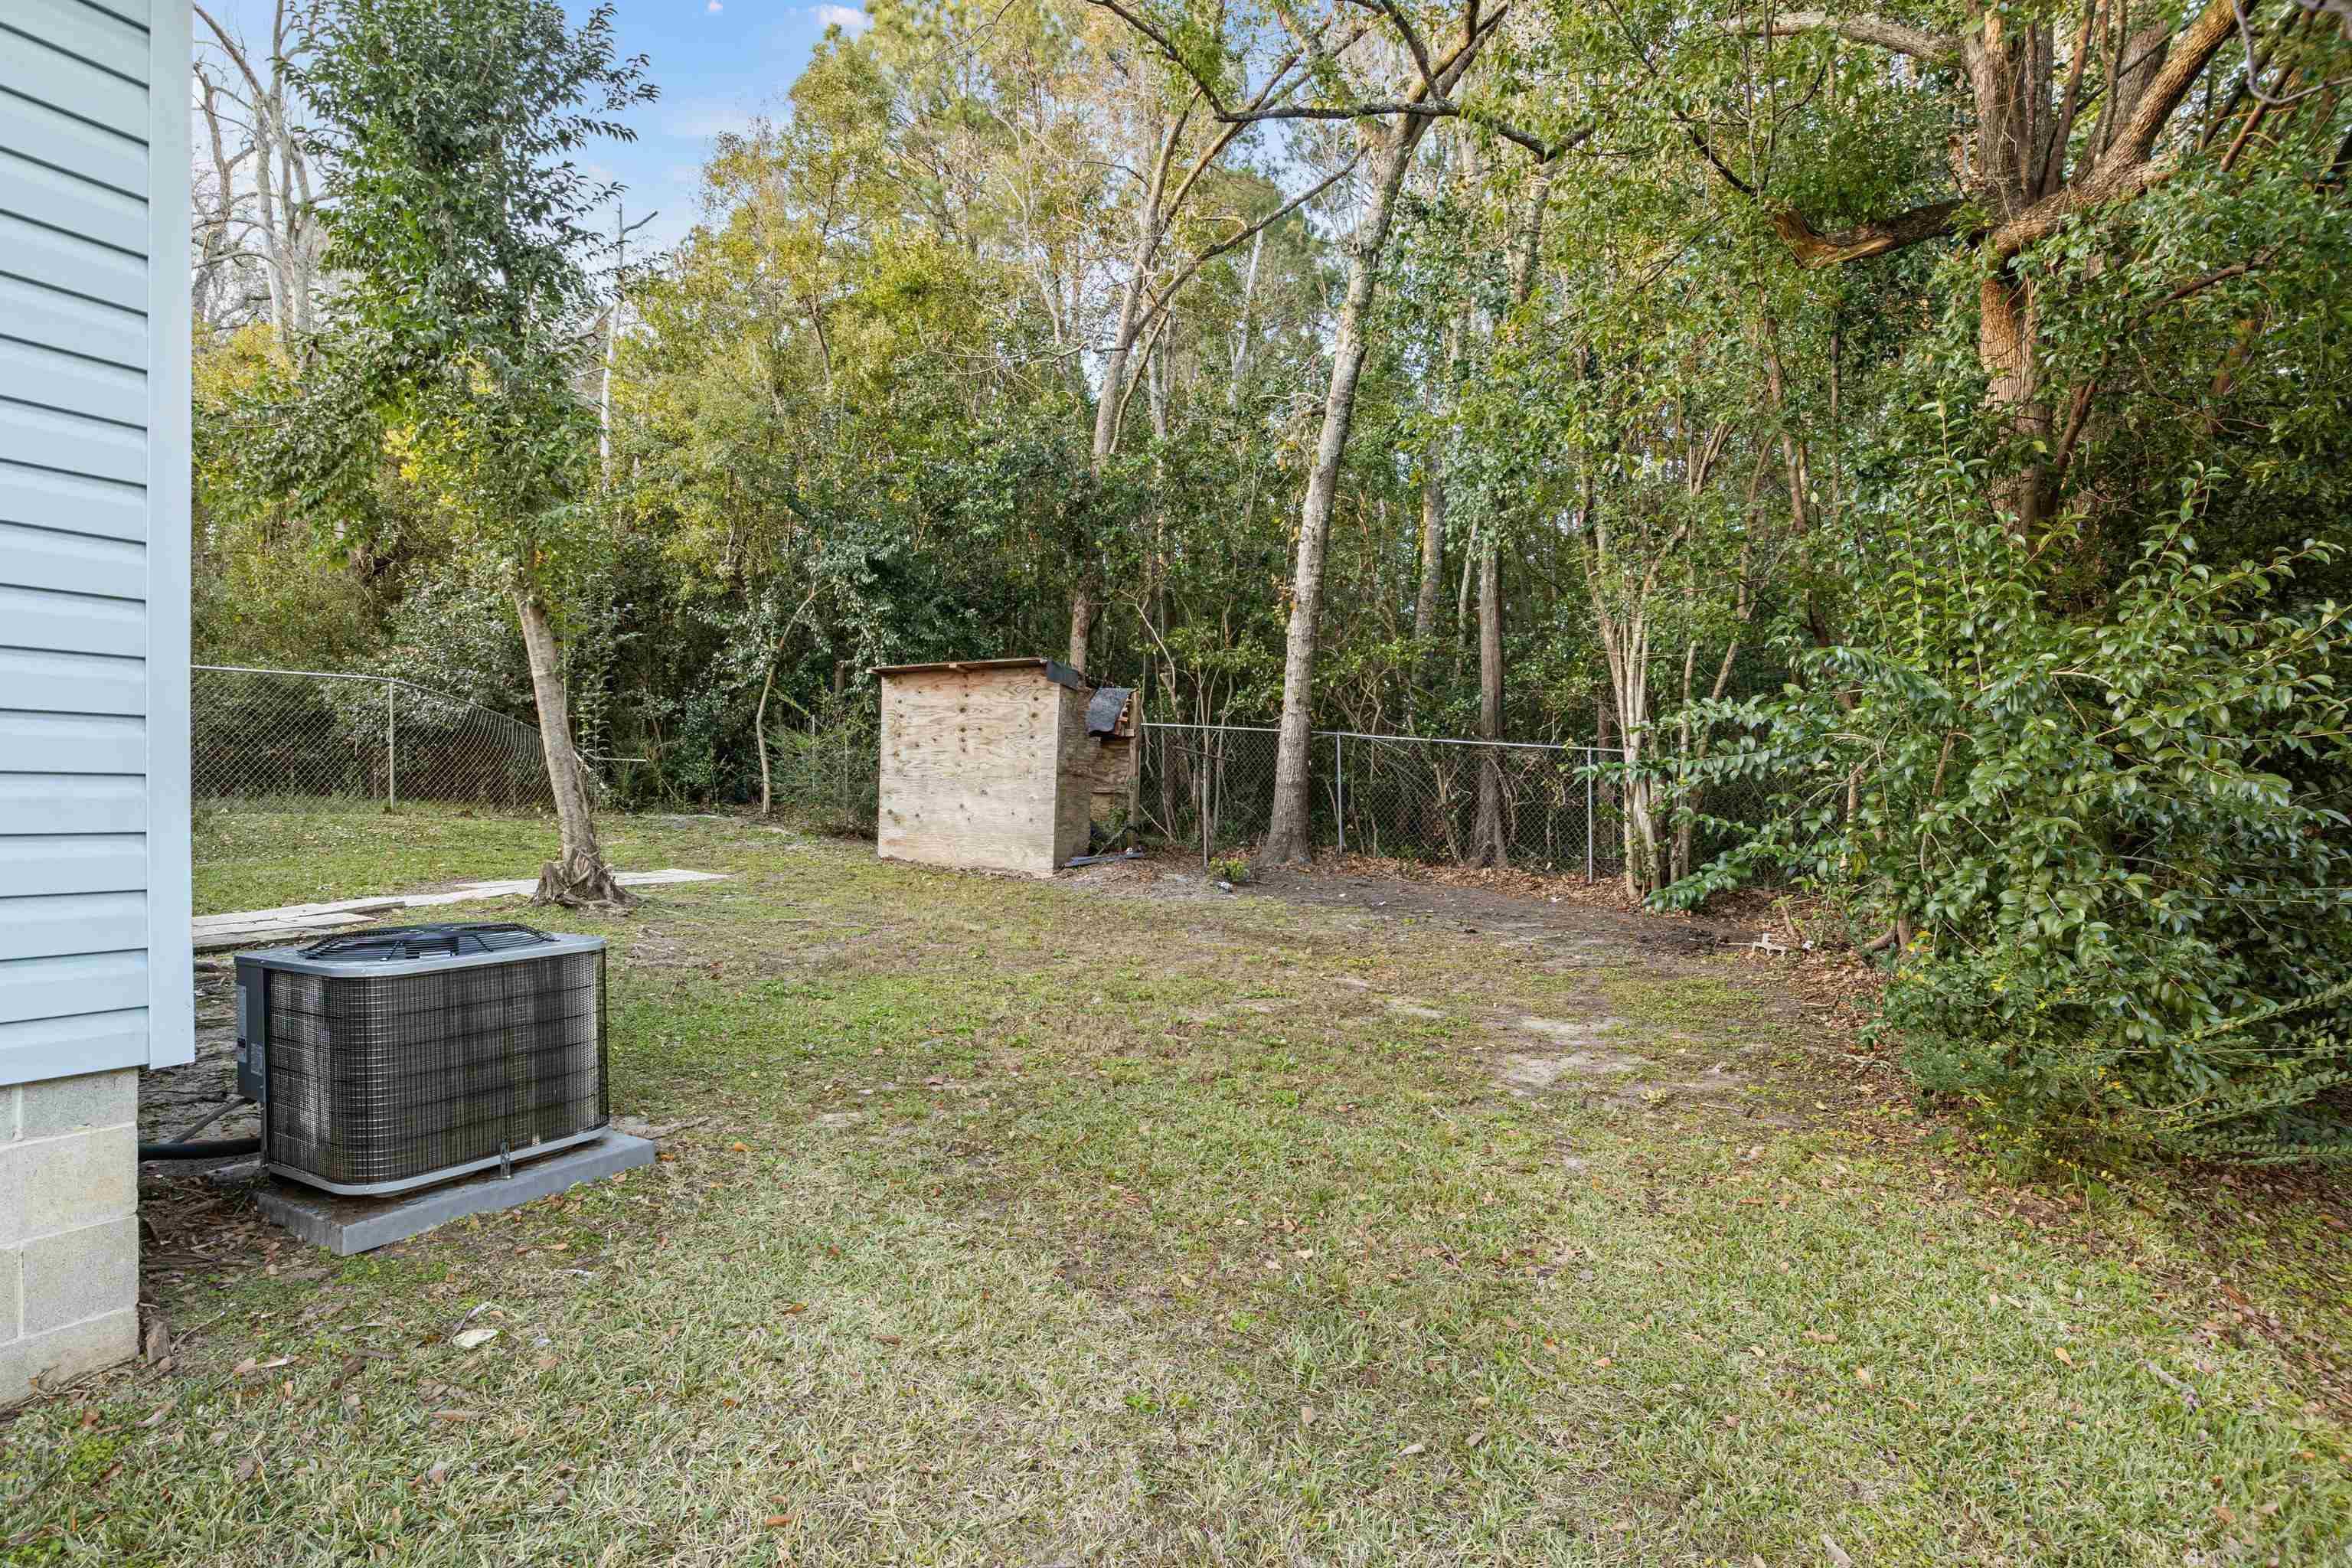 1010 Volusia Street,TALLAHASSEE,Florida 32304,2 Bedrooms Bedrooms,1 BathroomBathrooms,Detached single family,1010 Volusia Street,367658